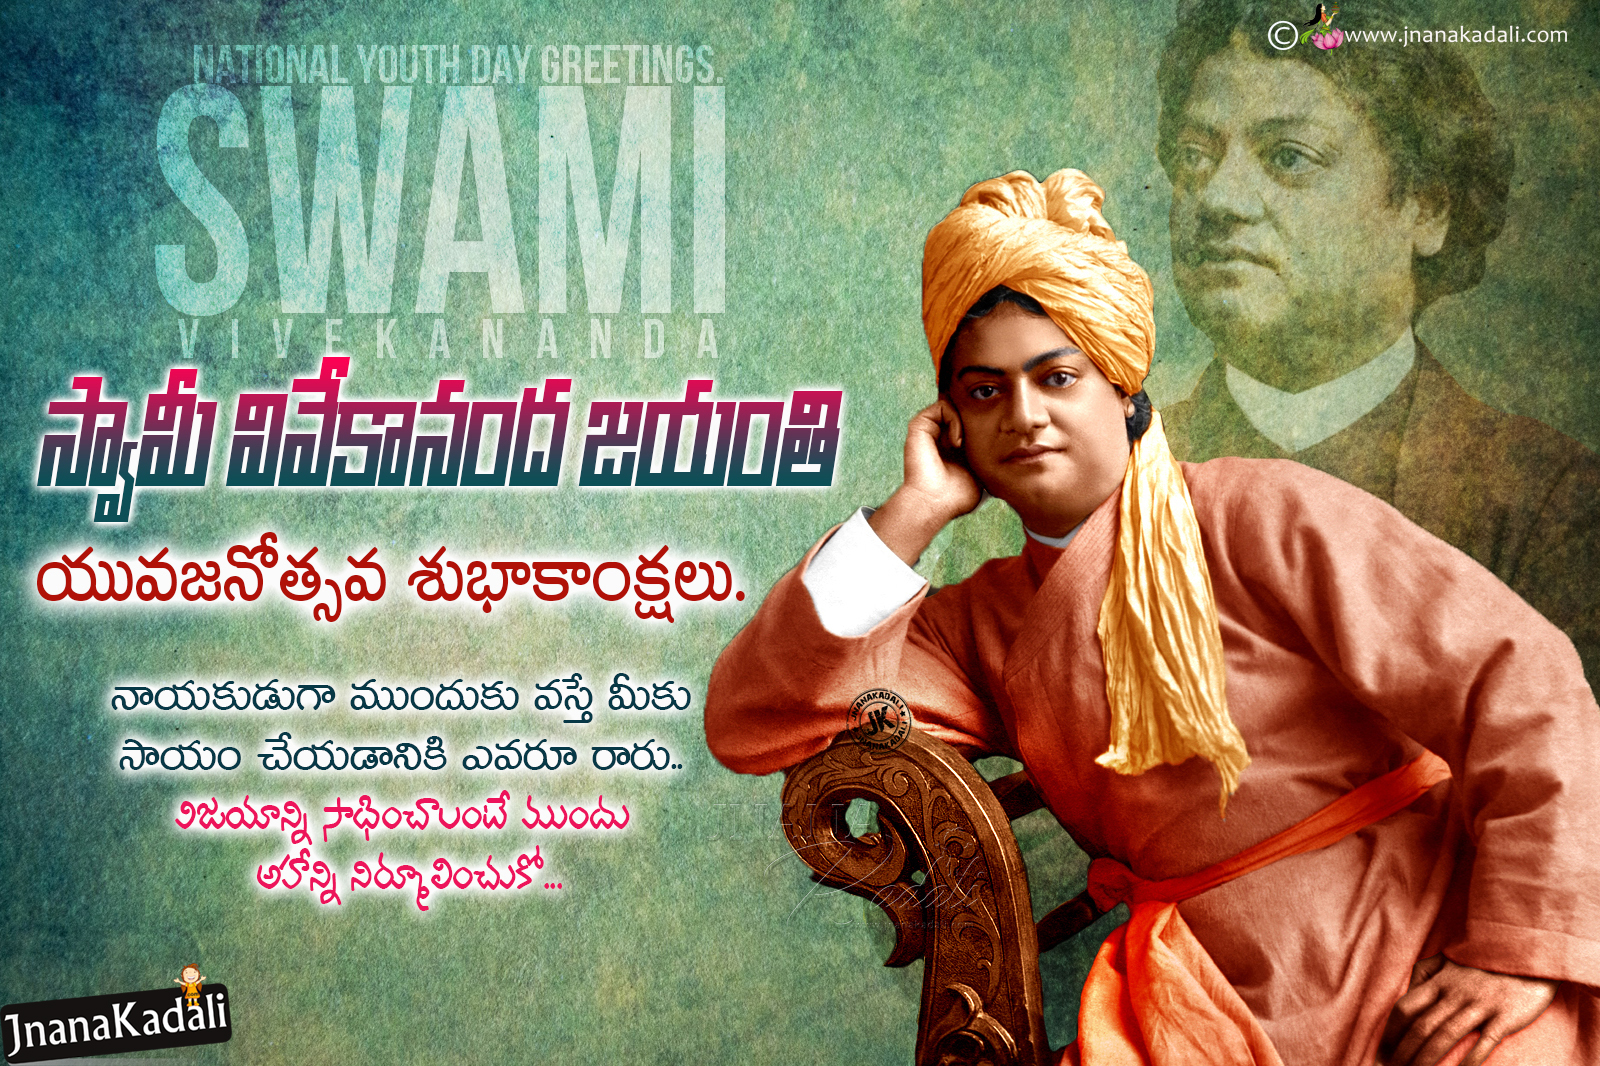 Advanced January 12th National Youth Day Greetings with Swami ...